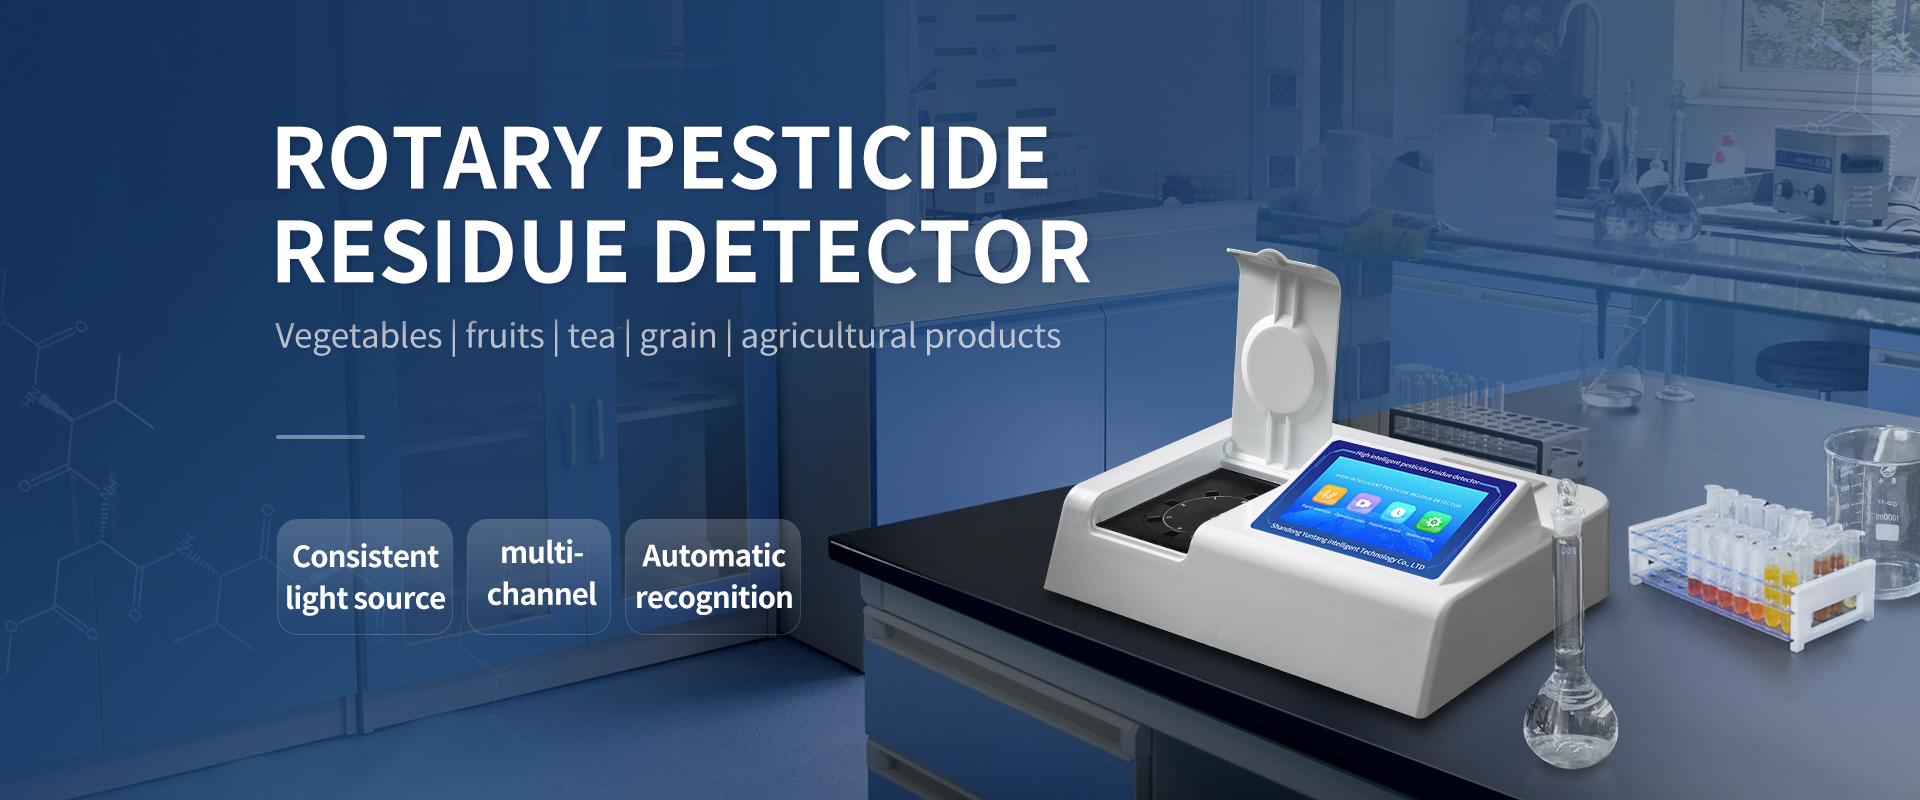 Food safety detector